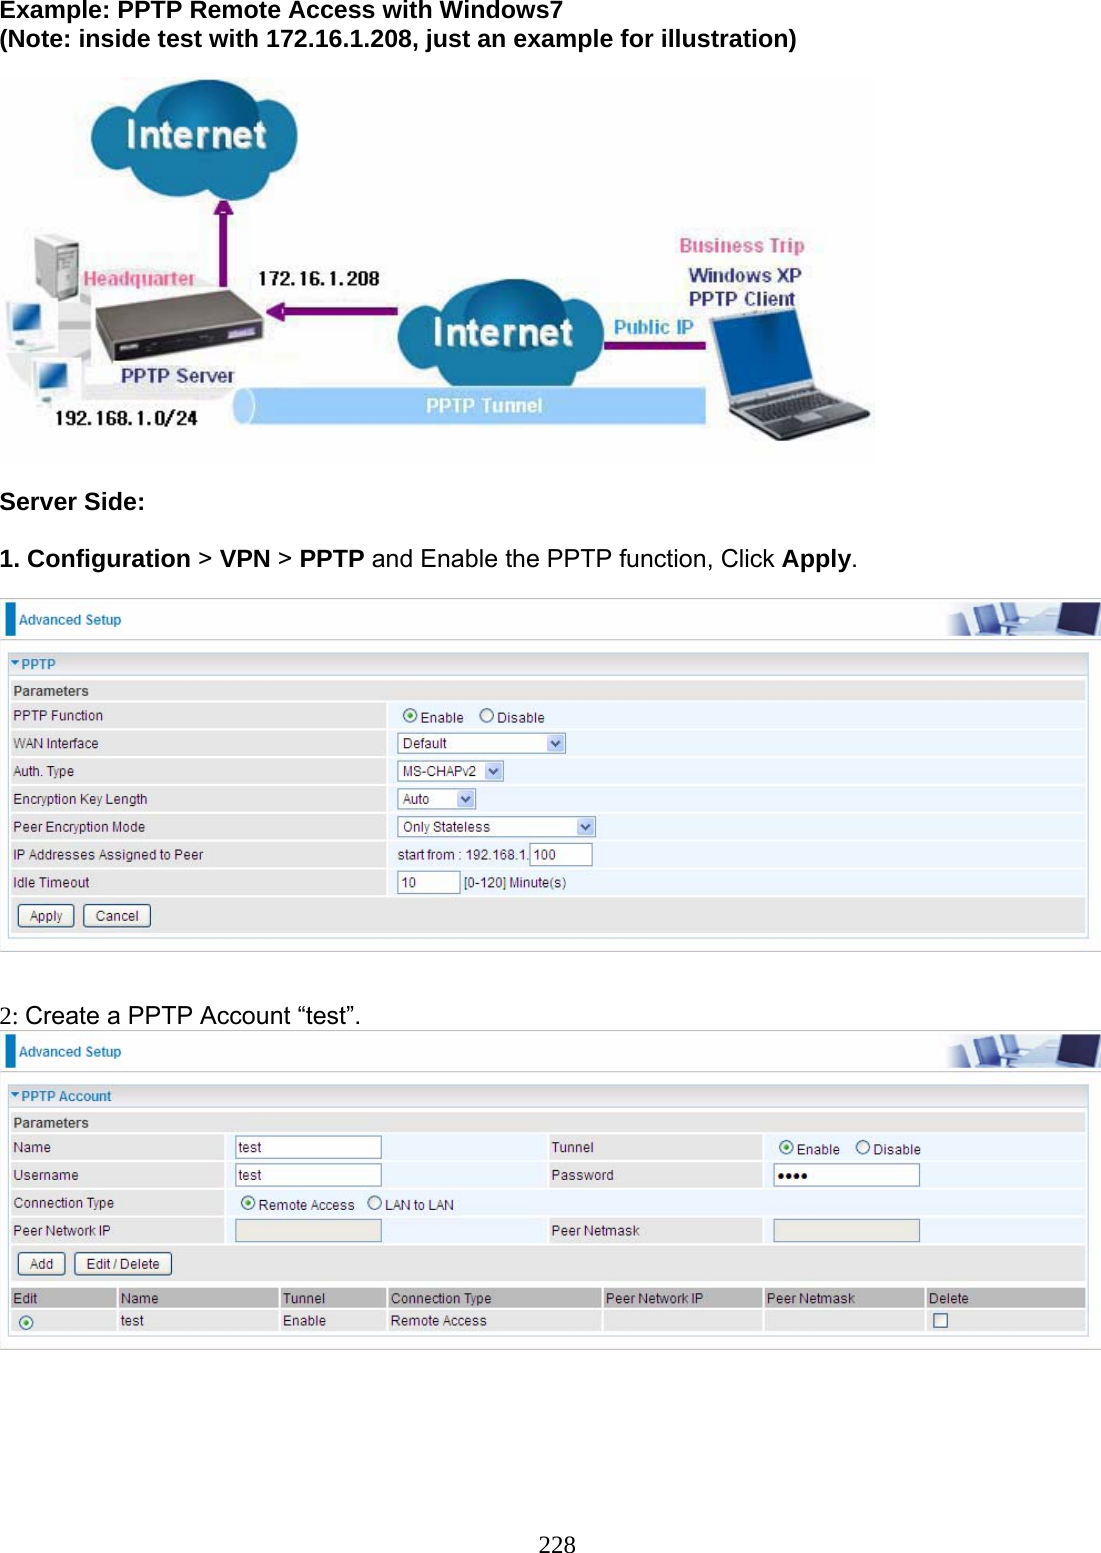 228 Example: PPTP Remote Access with Windows7  (Note: inside test with 172.16.1.208, just an example for illustration)    Server Side:  1. Configuration &gt; VPN &gt; PPTP and Enable the PPTP function, Click Apply.     2: Create a PPTP Account “test”.     